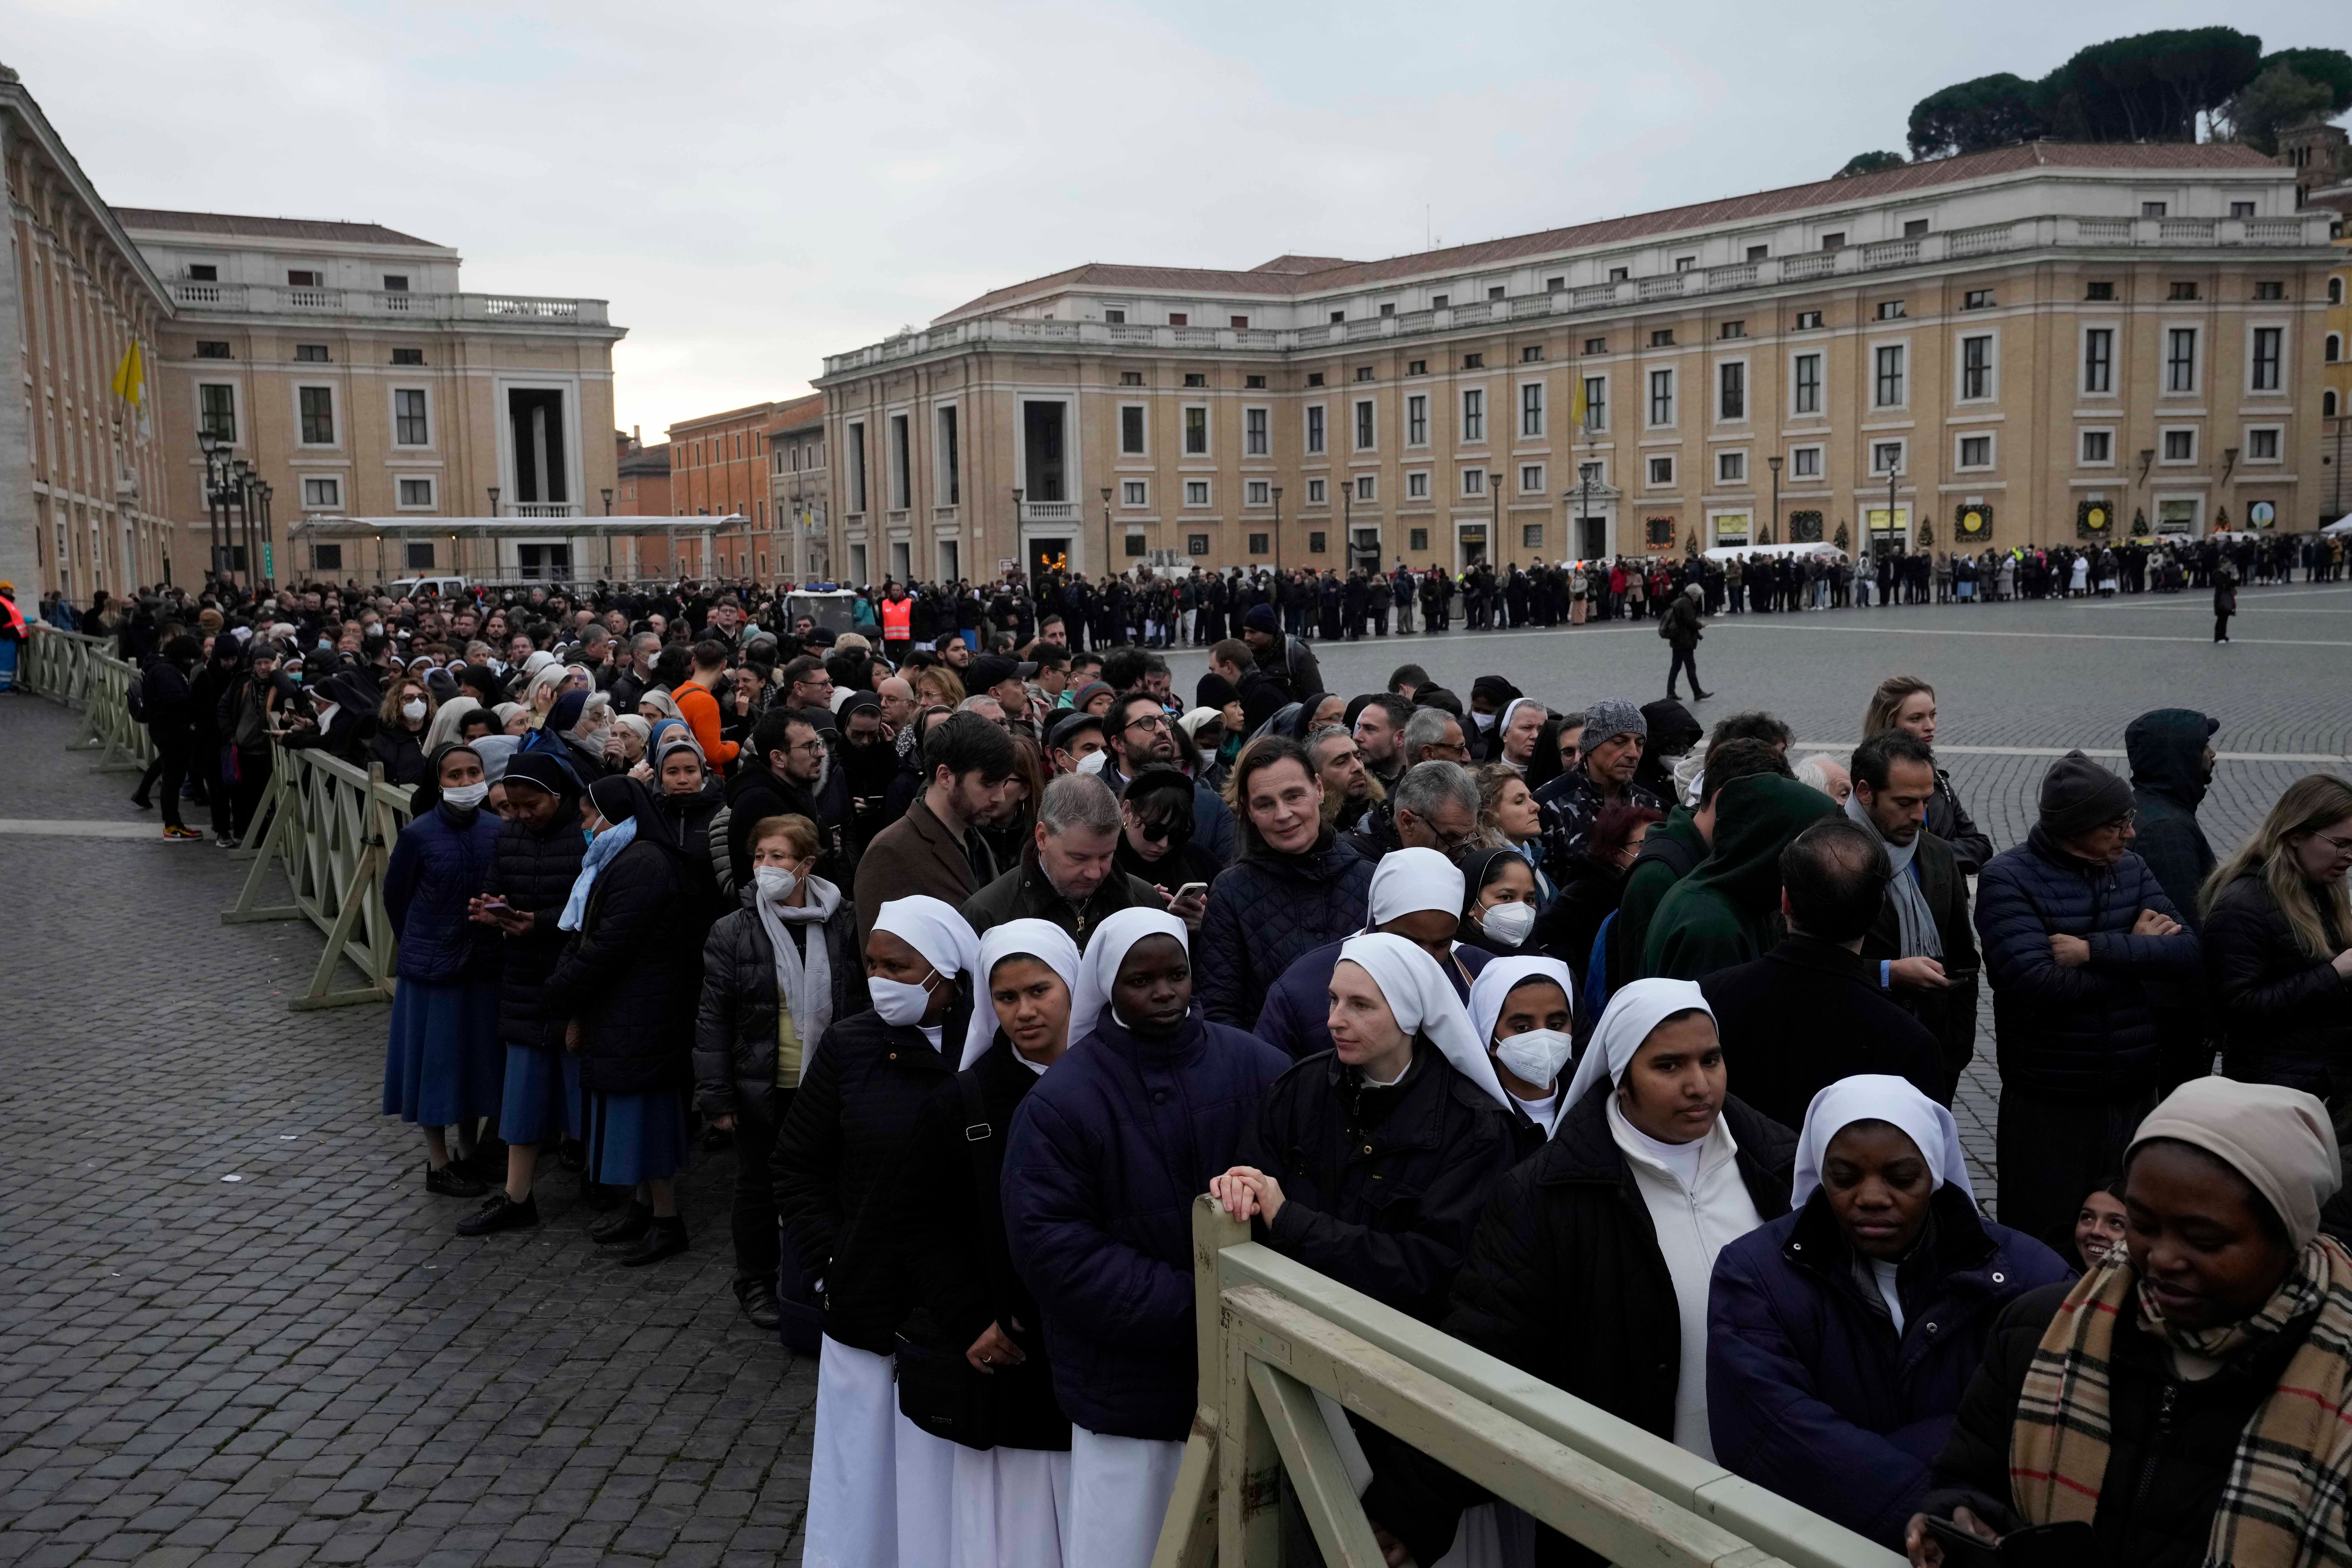 People wait in a line to enter Saint Peter's Basilica at the Vatican